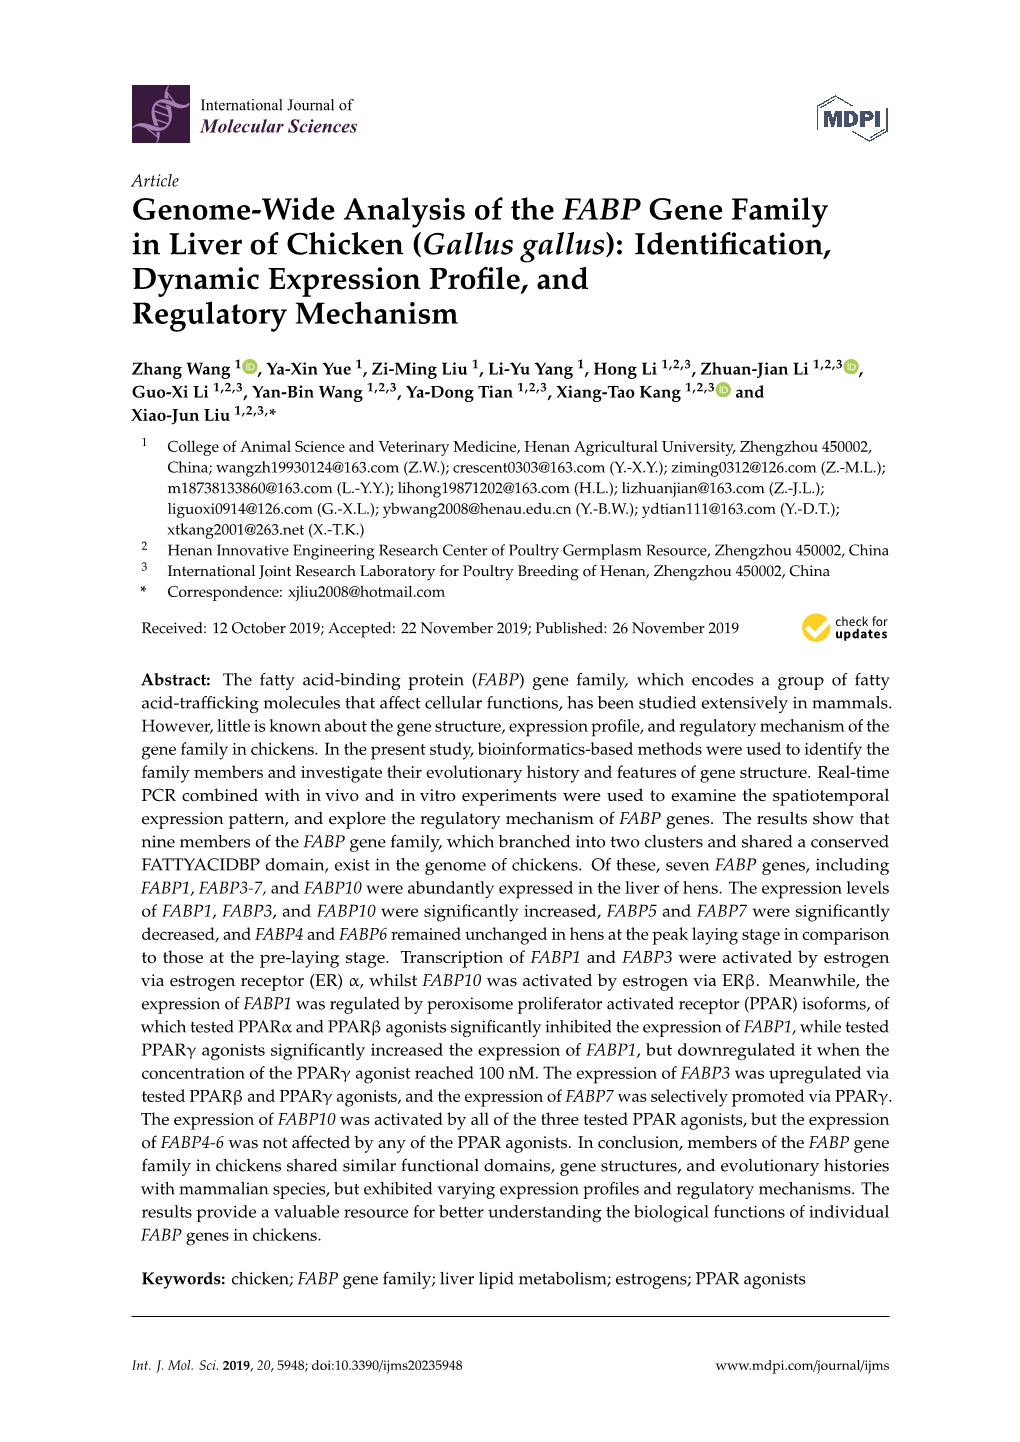 Genome-Wide Analysis of the FABP Gene Family in Liver of Chicken (Gallus Gallus): Identiﬁcation, Dynamic Expression Proﬁle, and Regulatory Mechanism